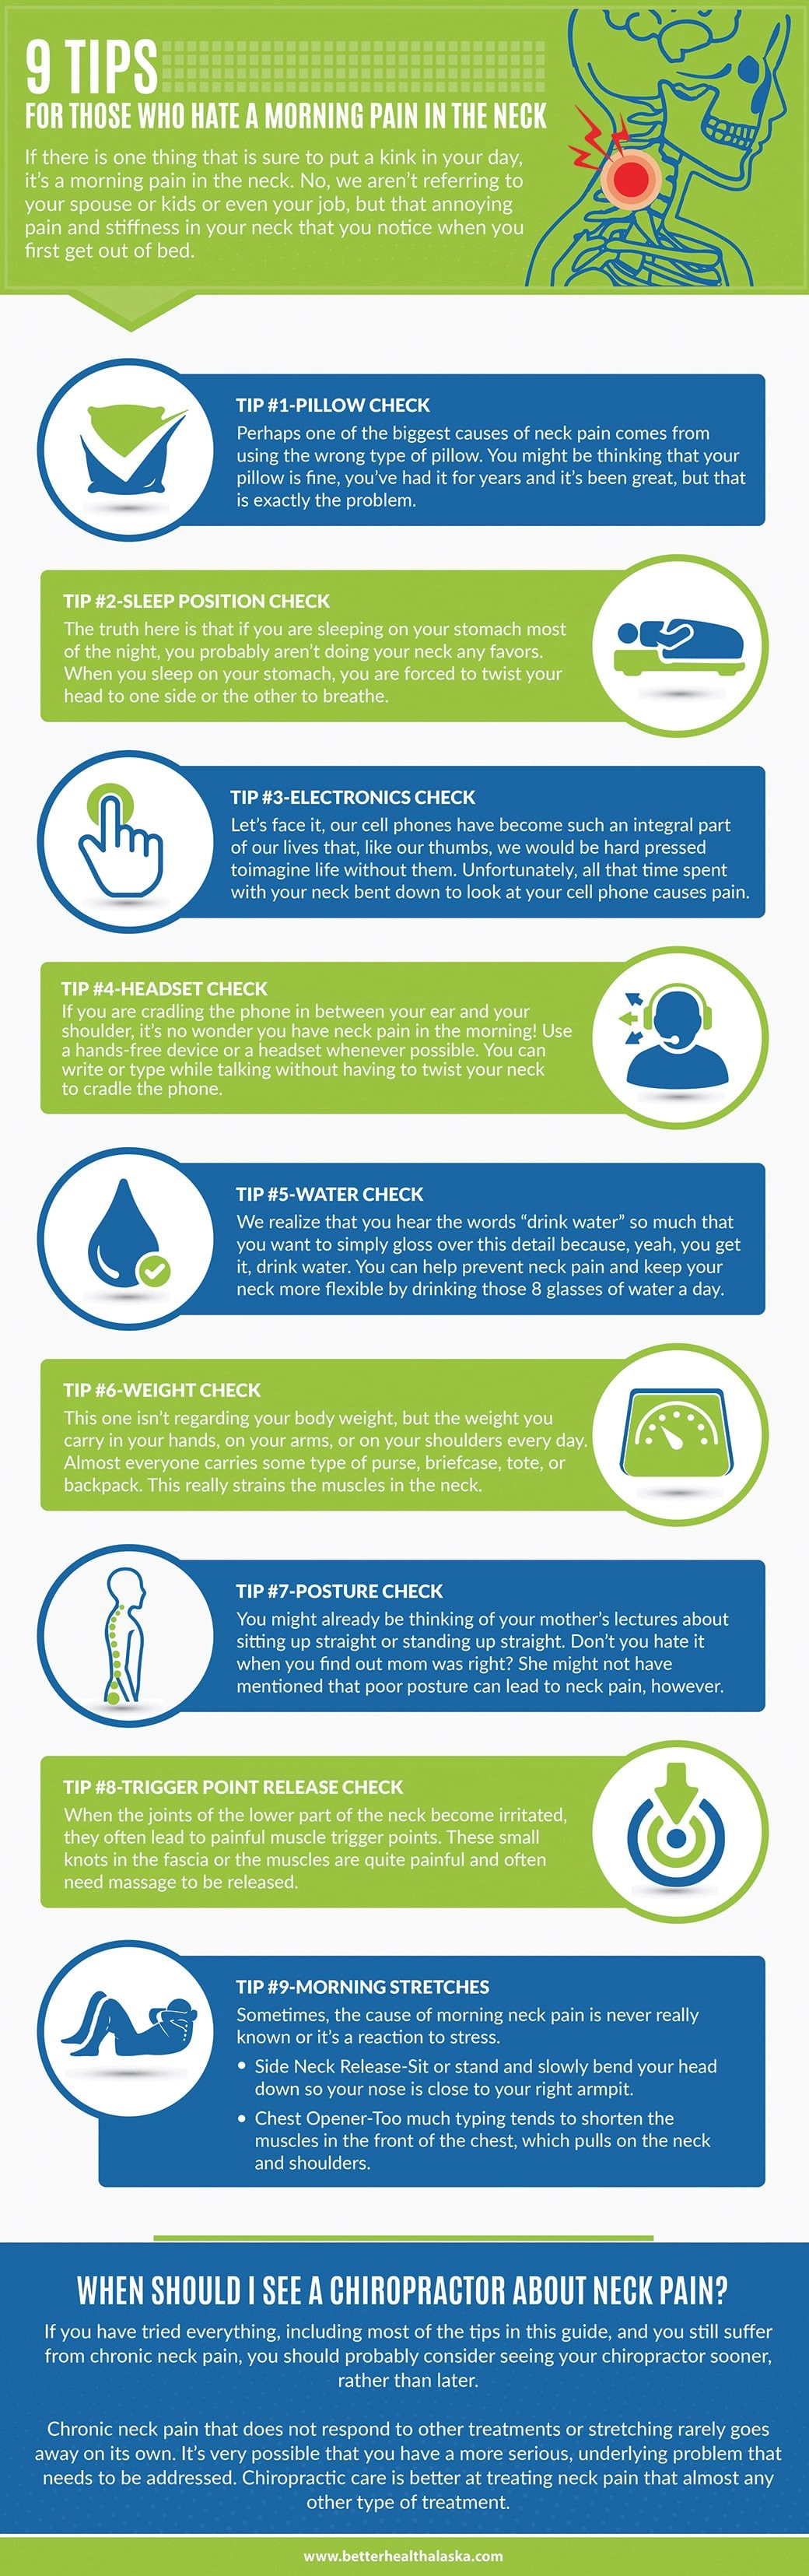 9 Tips for Those Who Hate a Morning Pain in the Neck Infographic